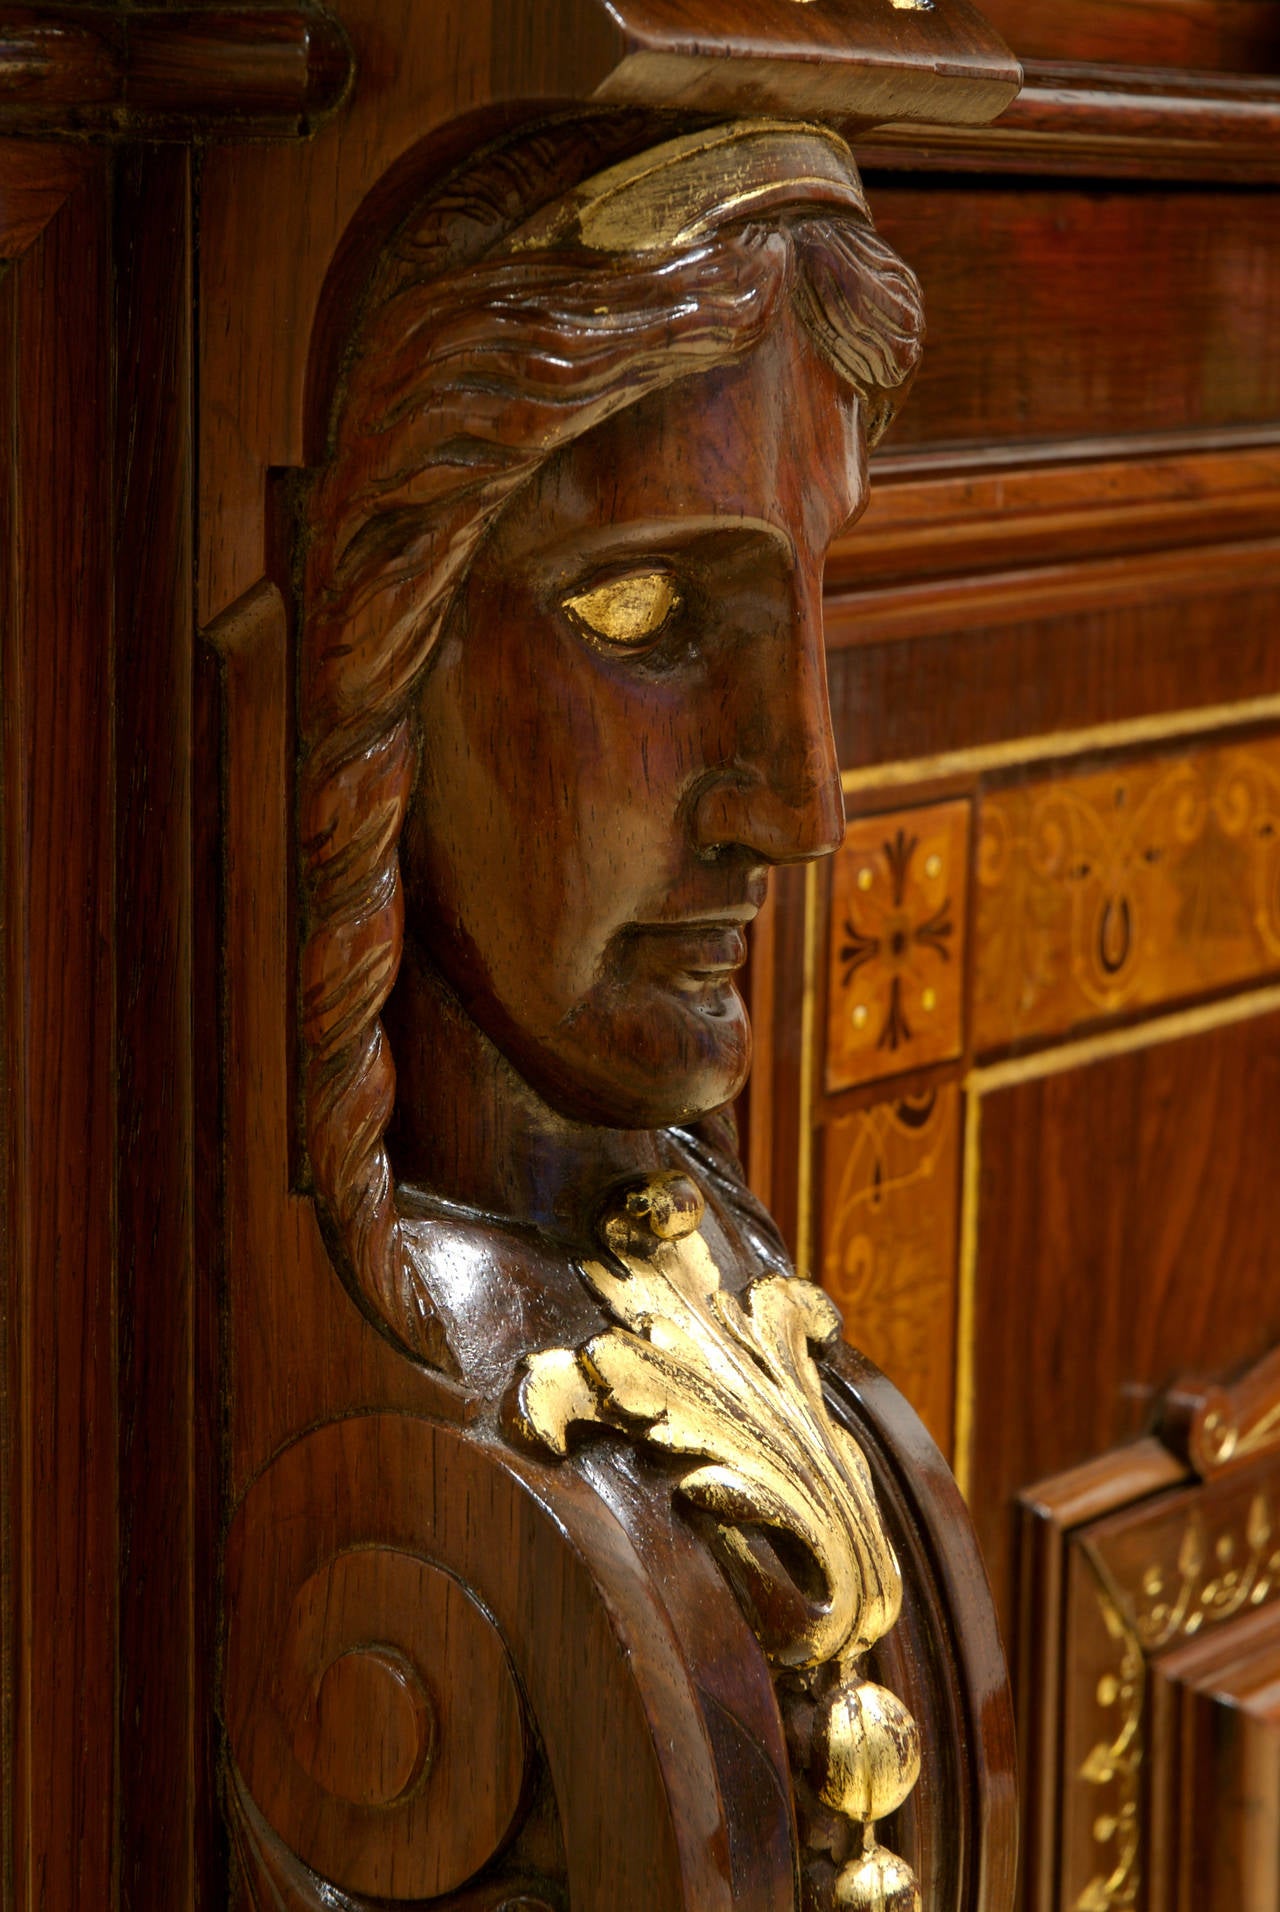 GUSTAVE HERTER (1839-1883) b. Germany/New York

Renaissance revival “portrait” cabinet   1858 – 1864

Carved cherry wood portrait plaque, mahogany, exotic wood inlays and gilding; black and gold veined marble top

Marks: G. Herter / New York